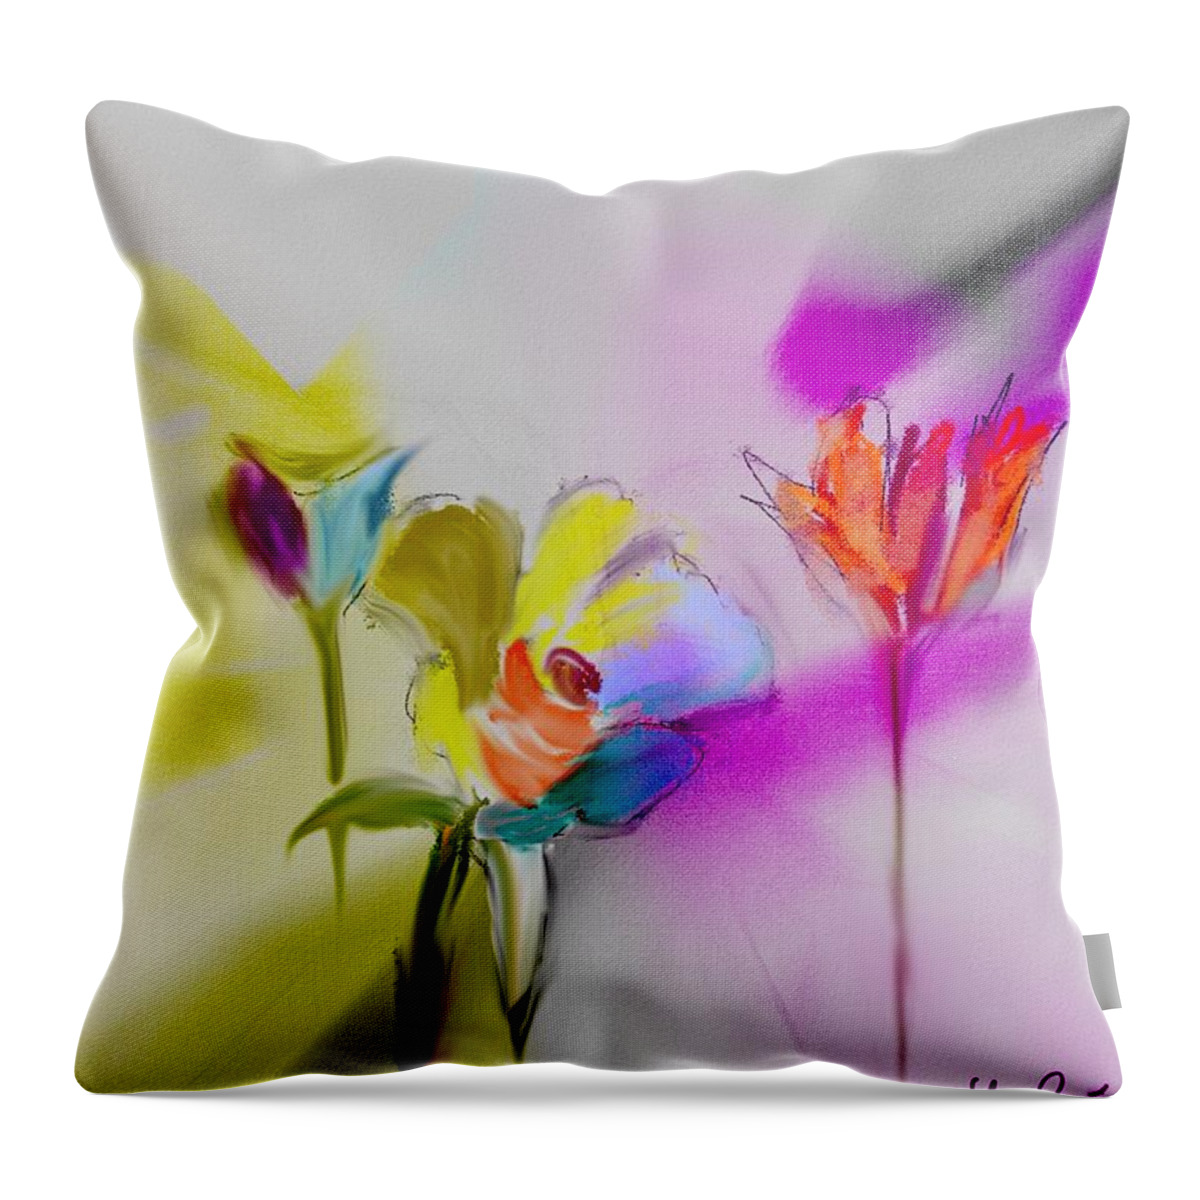 Ipad Painting Throw Pillow featuring the digital art Paper Flowers by Frank Bright